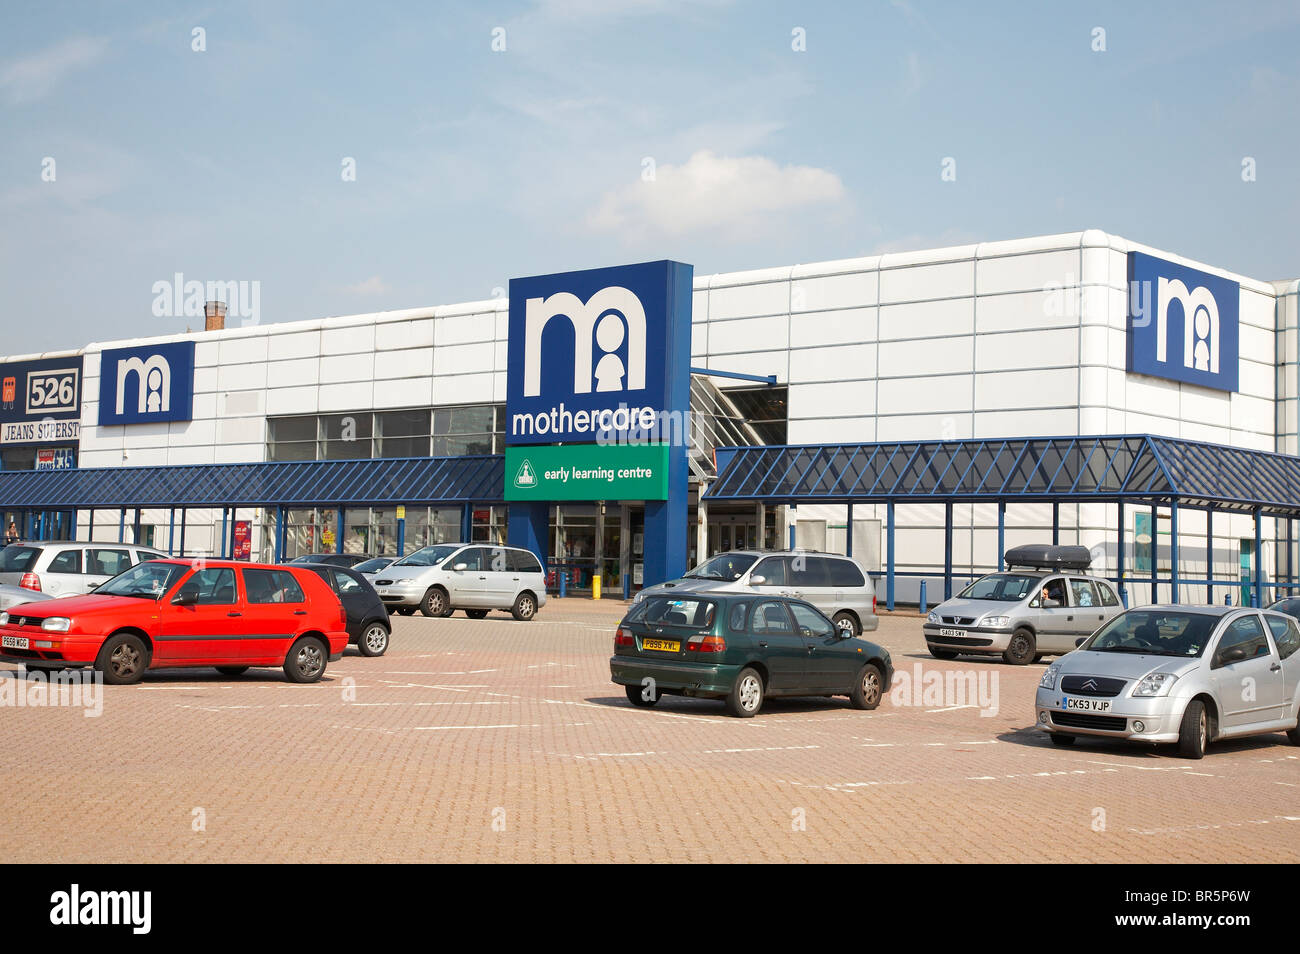 Mothercare with Early learning centre in Manchester UK Stock Photo